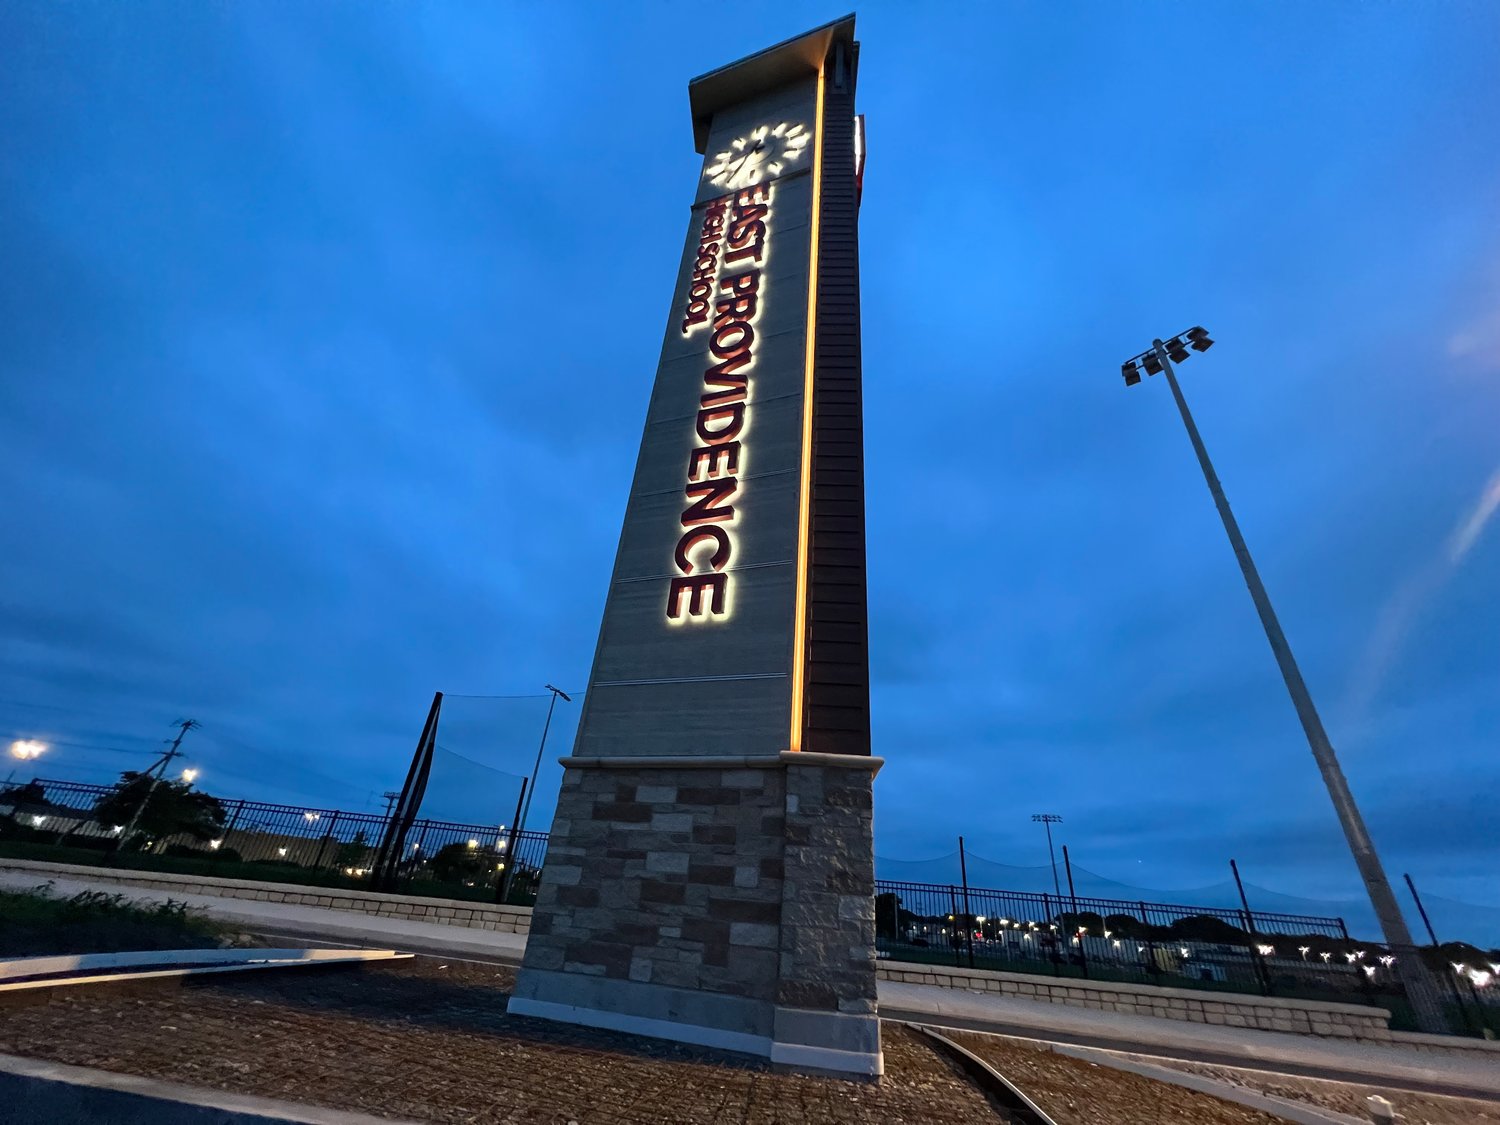 The new EPHS clock tower illuminated on the evening of June 16.